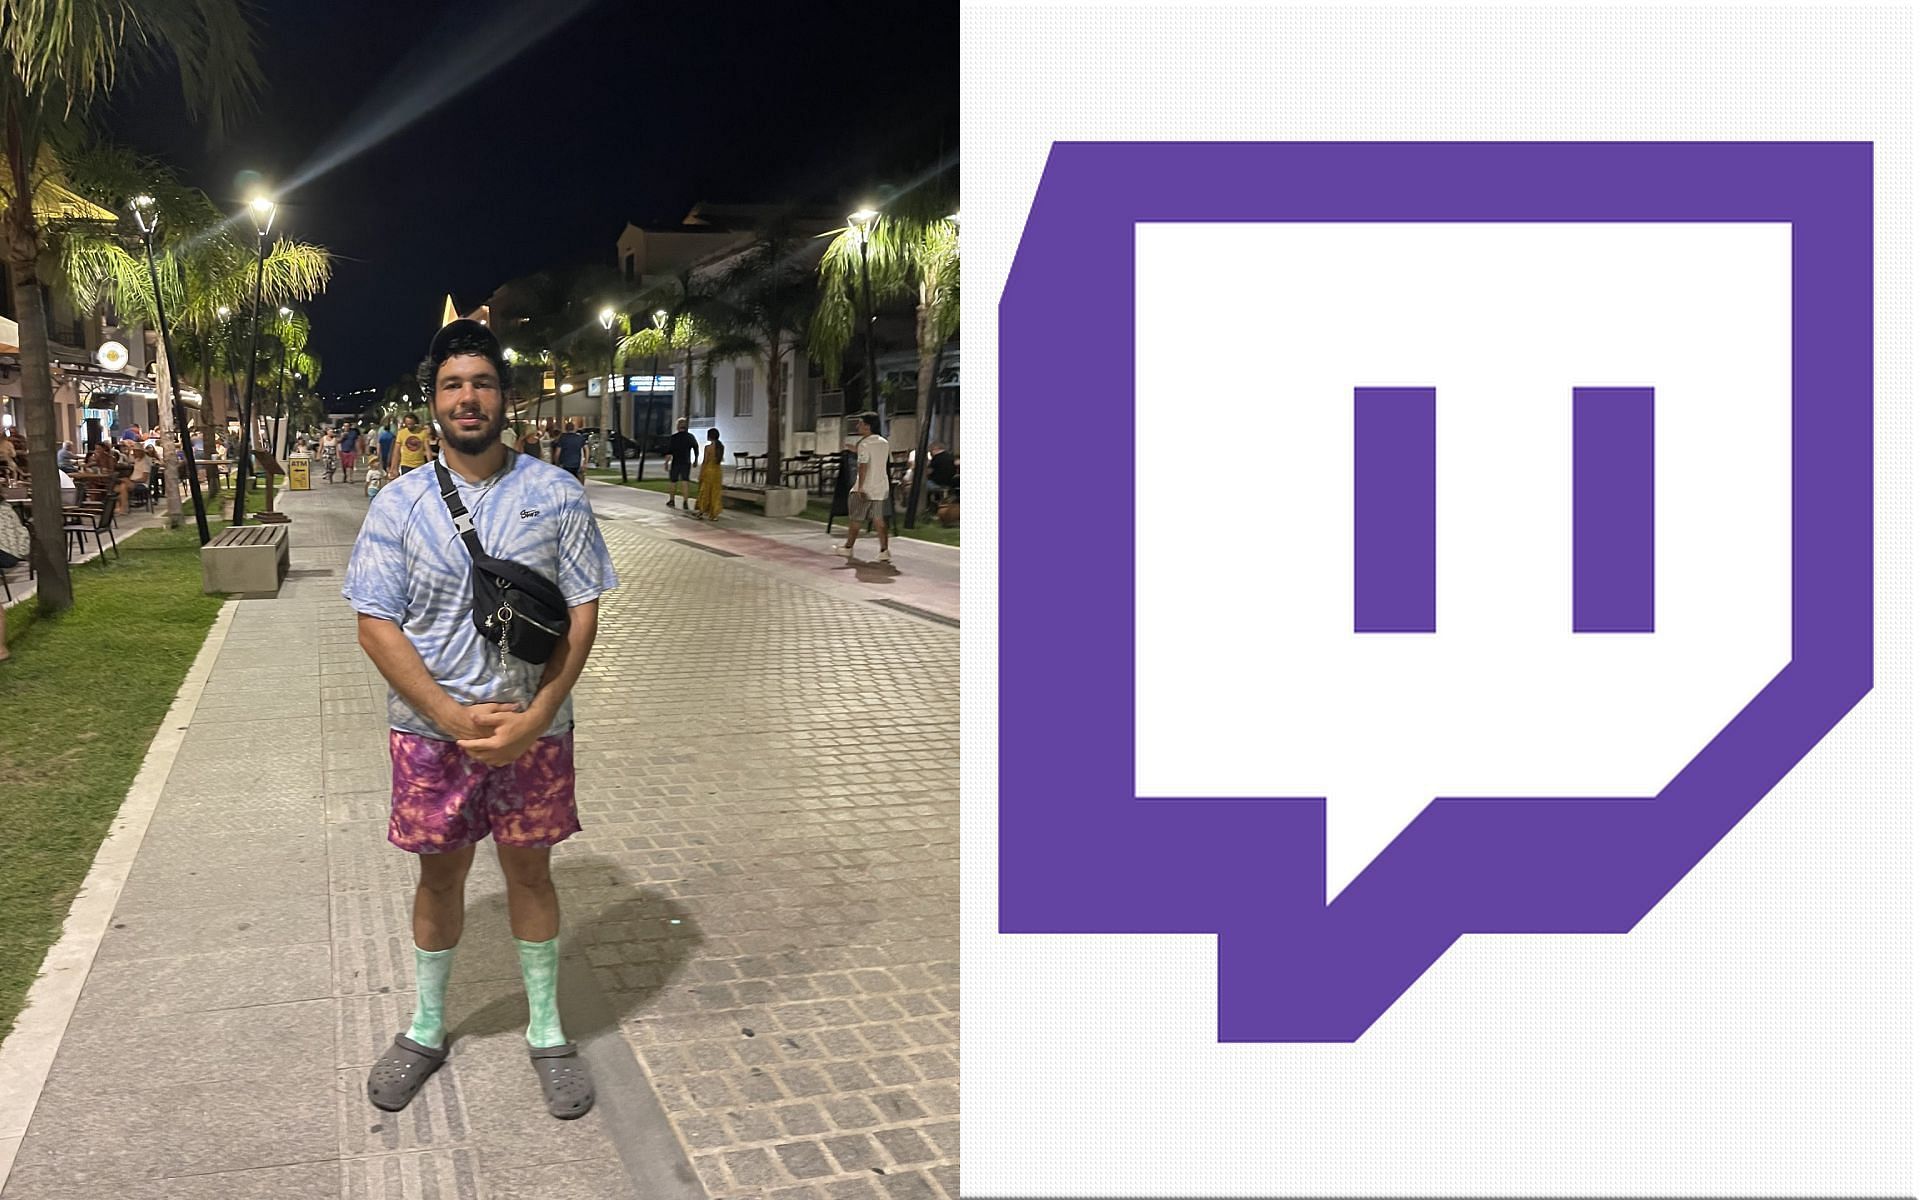 Greekgodx was banned for allegedly making racist sounds during an IRL stream (Image via Sportskeeda)